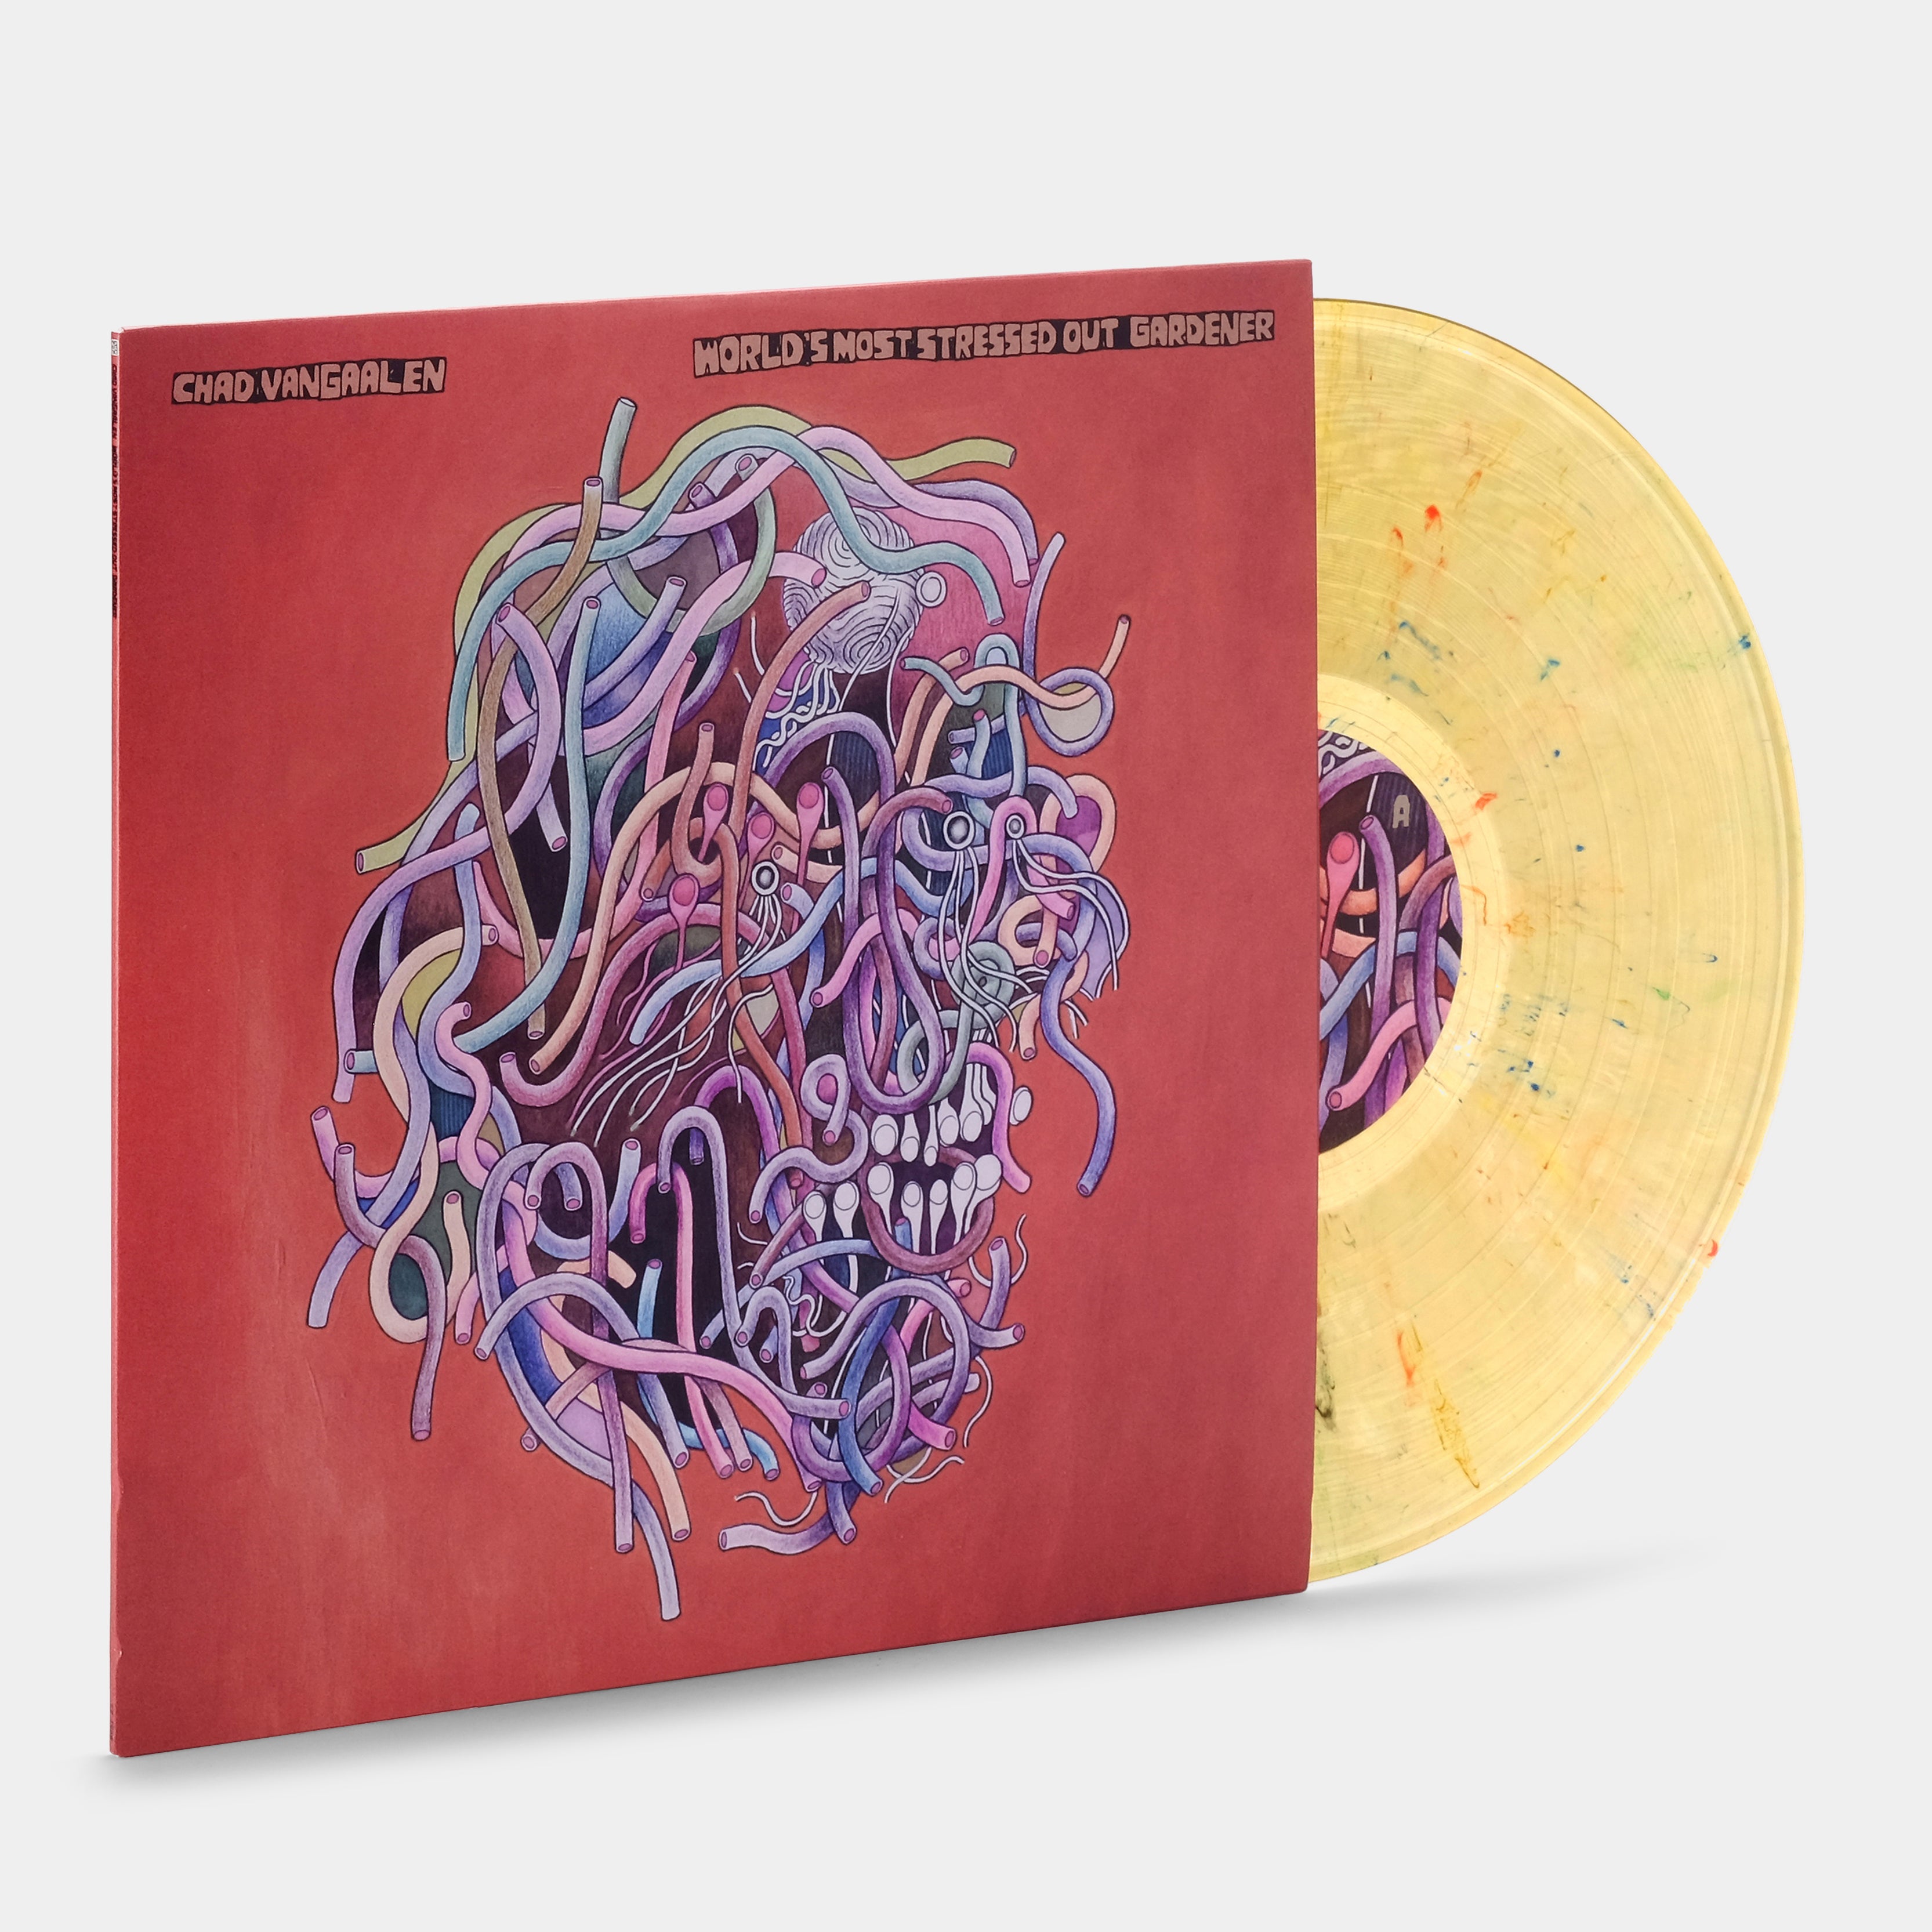 Chad VanGaalen - World's Most Stressed Out Gardener LP Translucent Gold Marble Vinyl Record